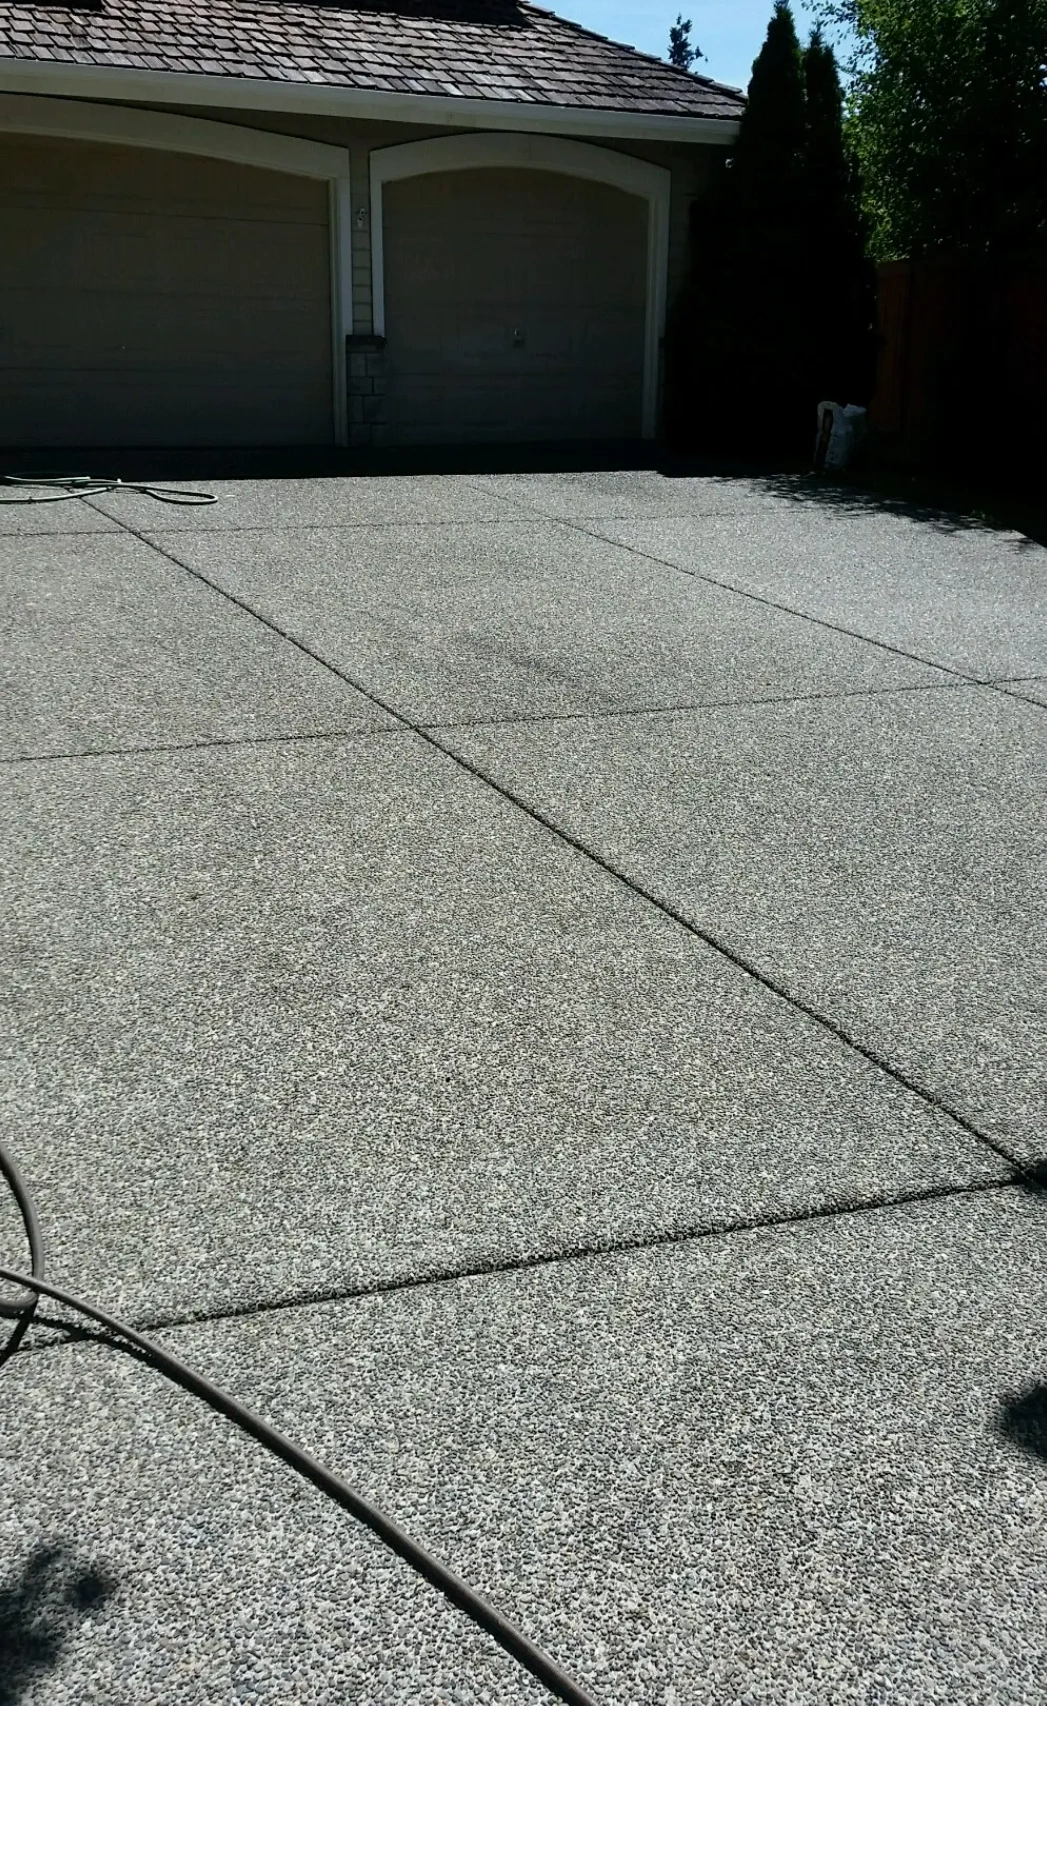 A freshly pressure washed driveway in Woodinville after we cleaned the gutters on a residential home